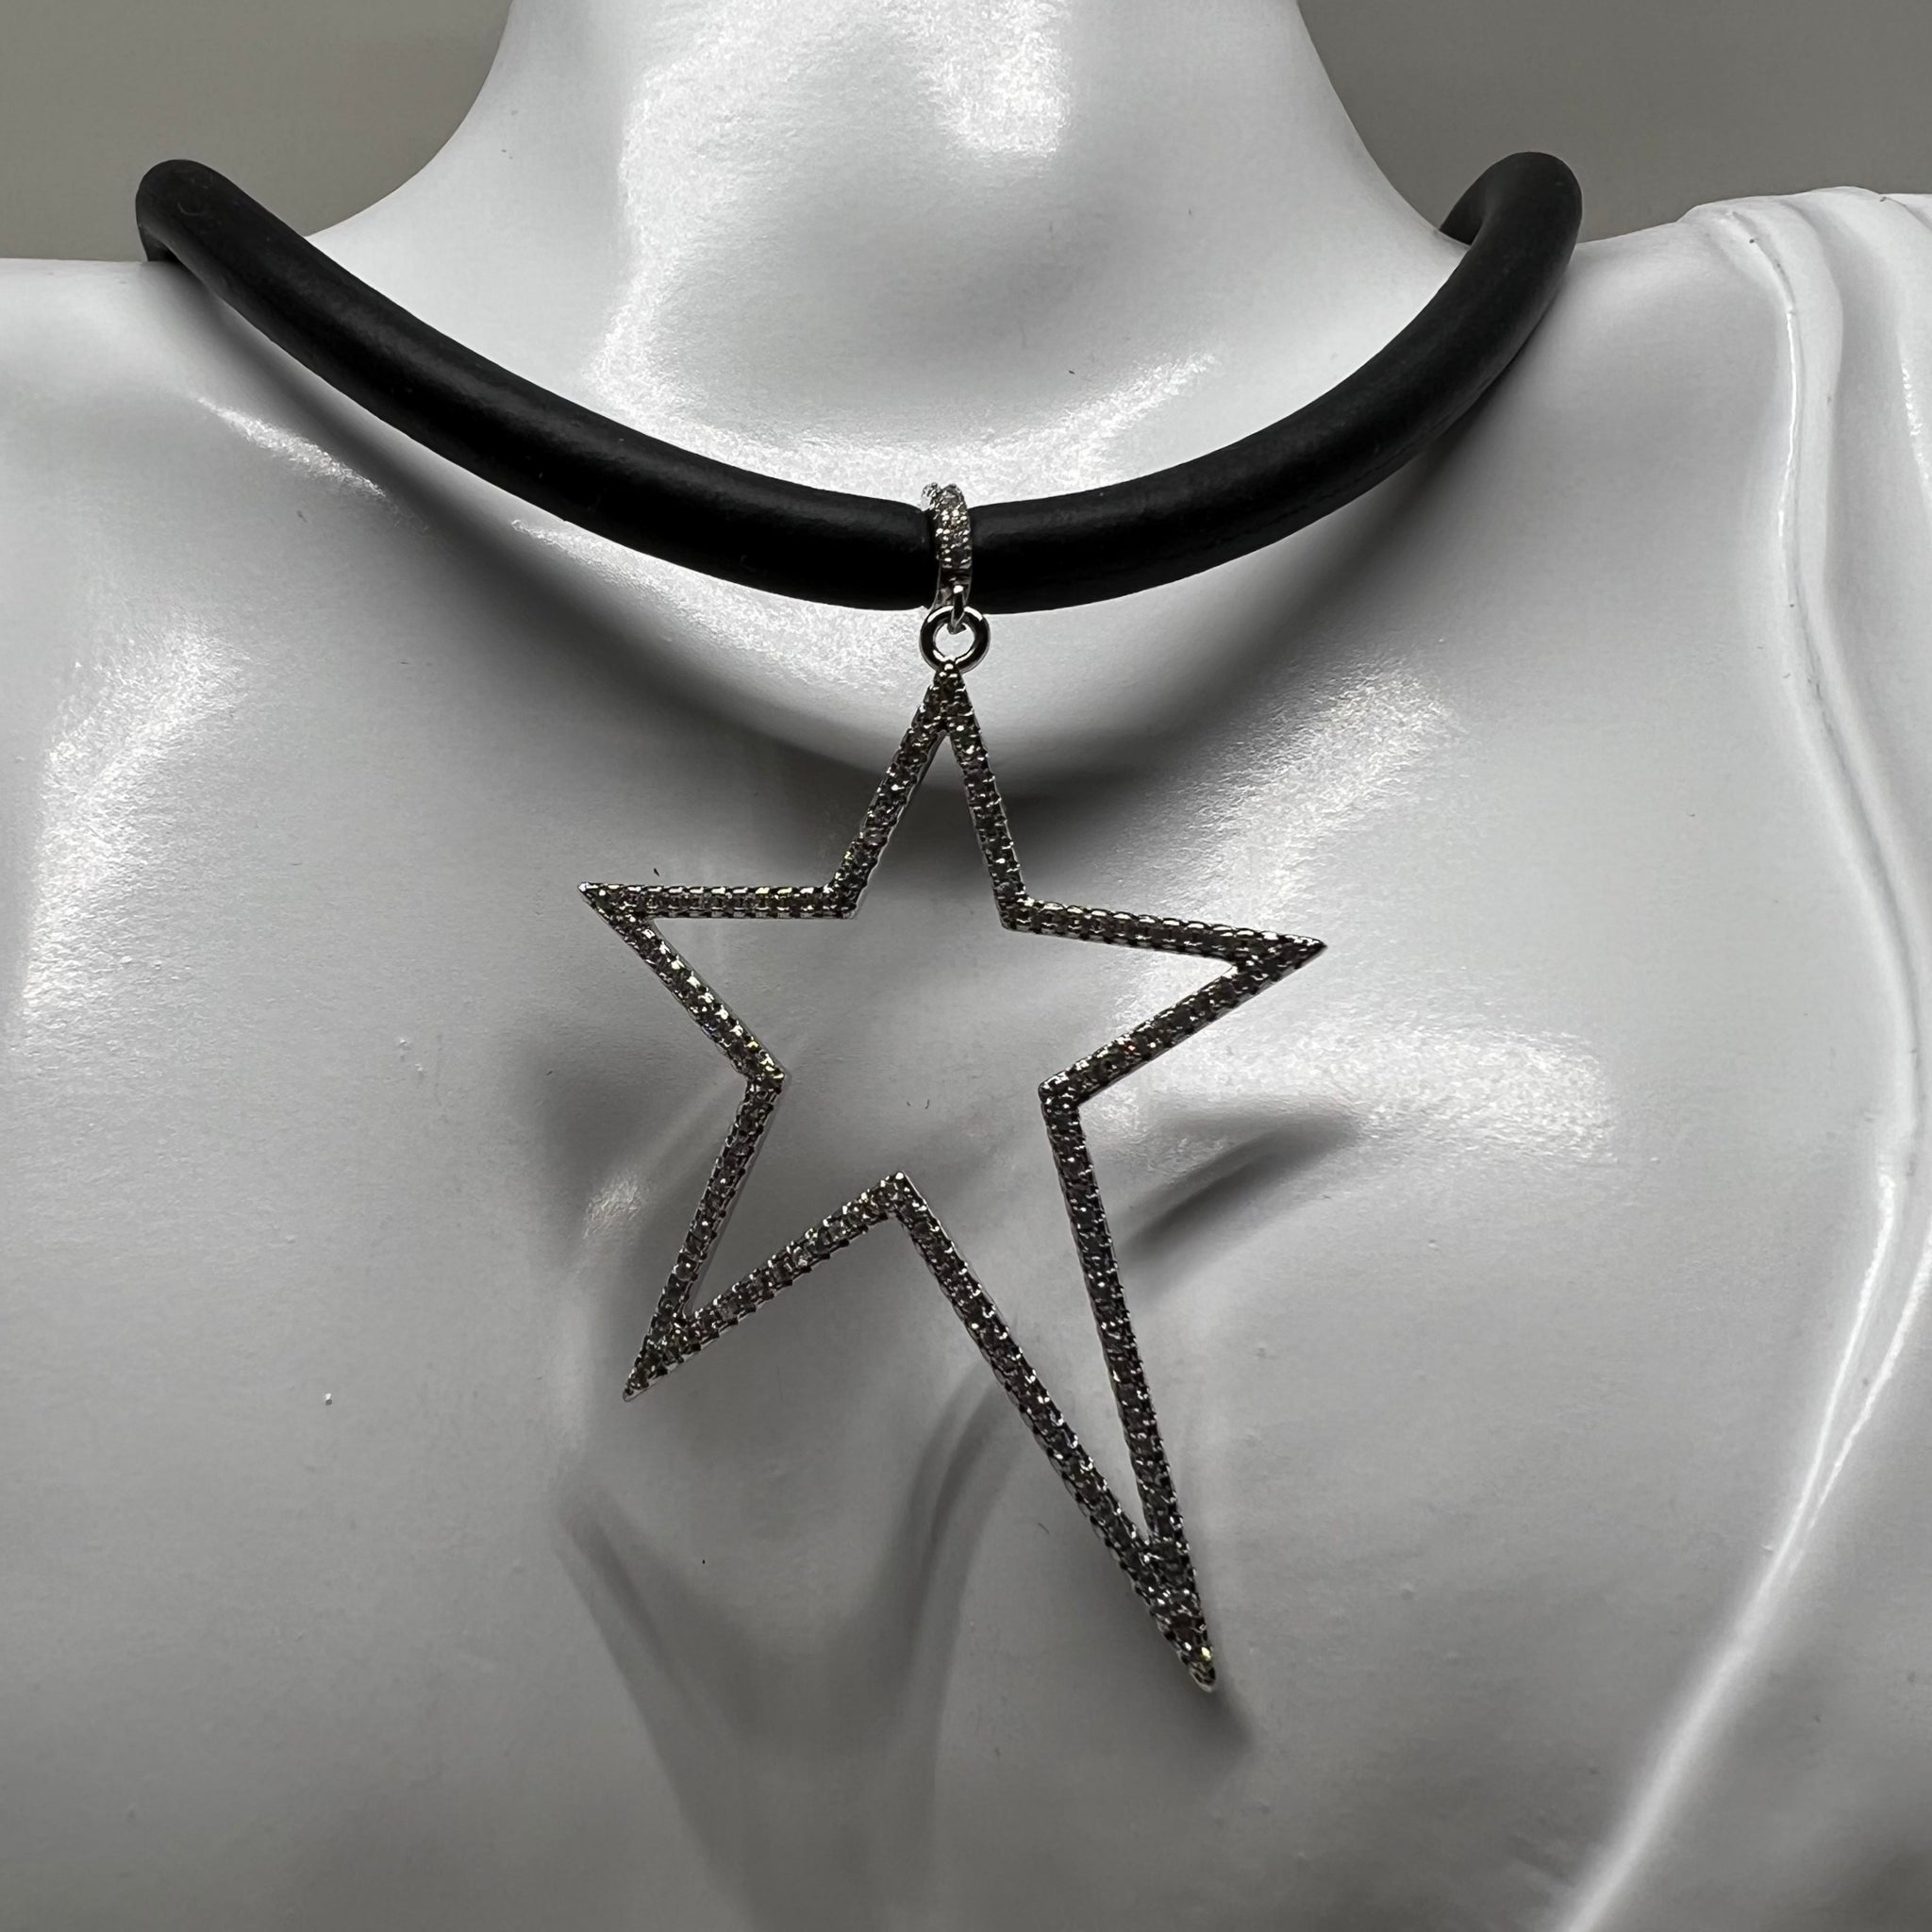 Shining star number necklace by NYET Jewelry